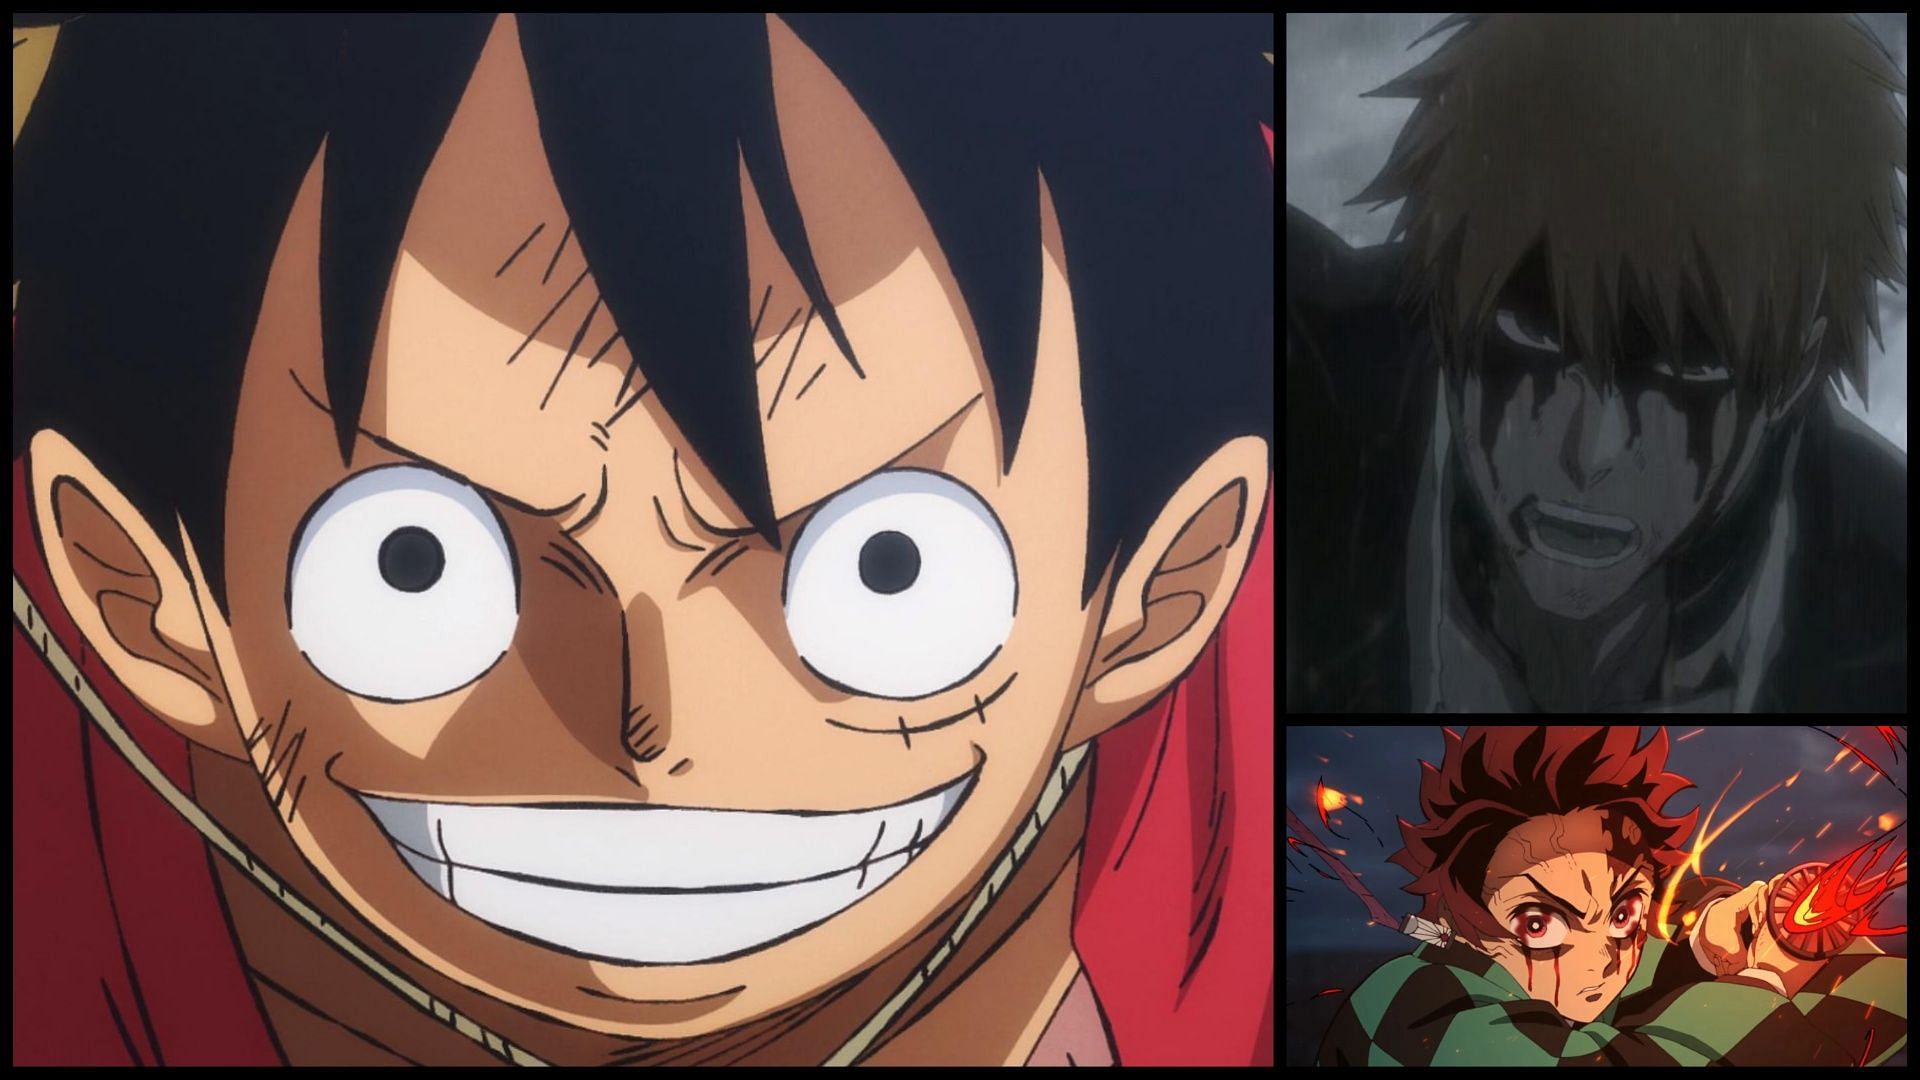 Ratings- Attack on Titan / One Piece / Bleach